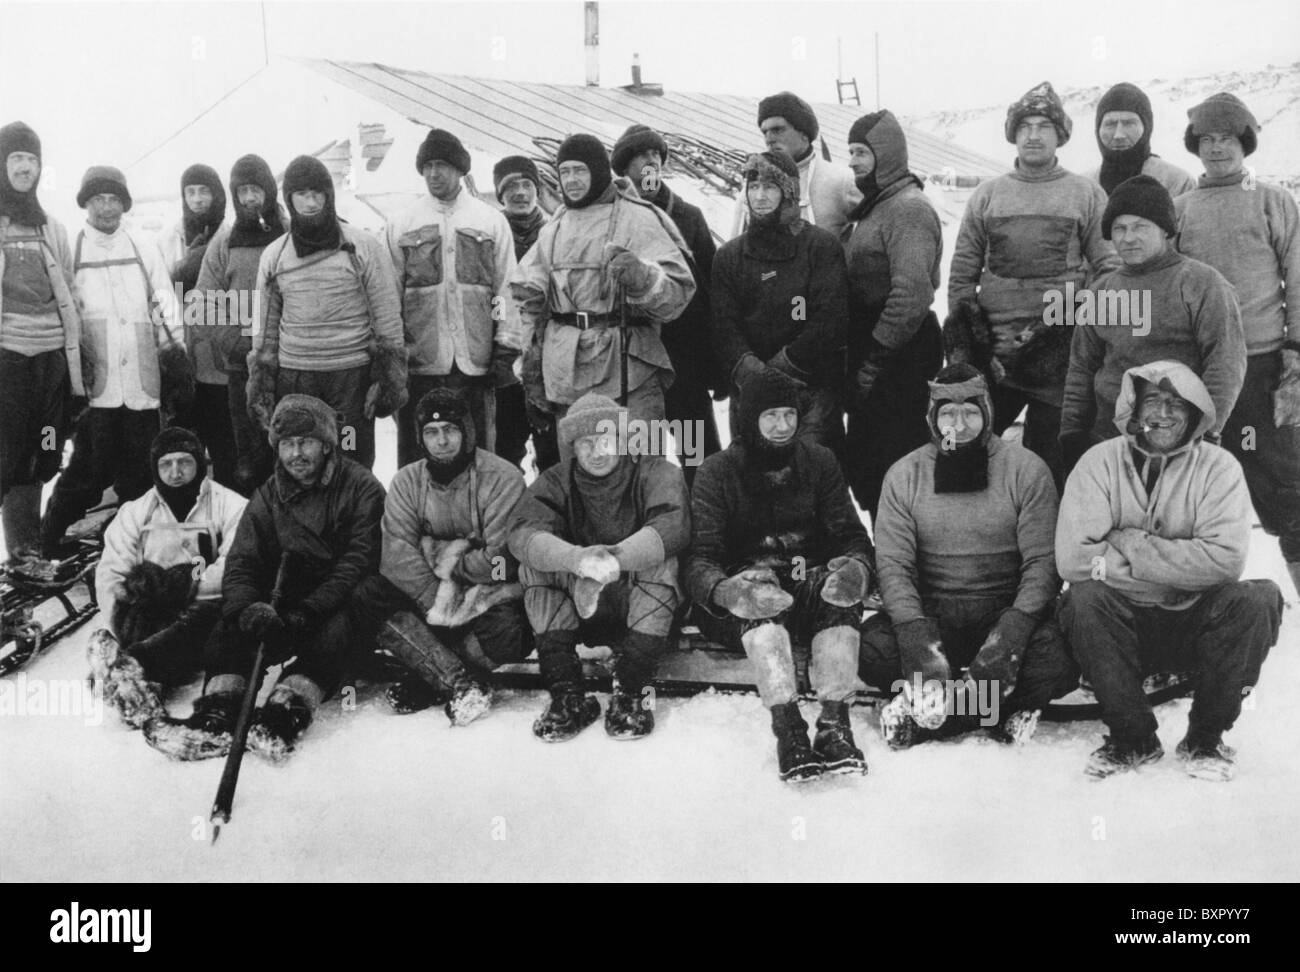 ROBERT FALCON SCOTT (1868-1912) back row centre in balaclava with members of the ill-fated British Antarctic expedition in 1912 Stock Photo